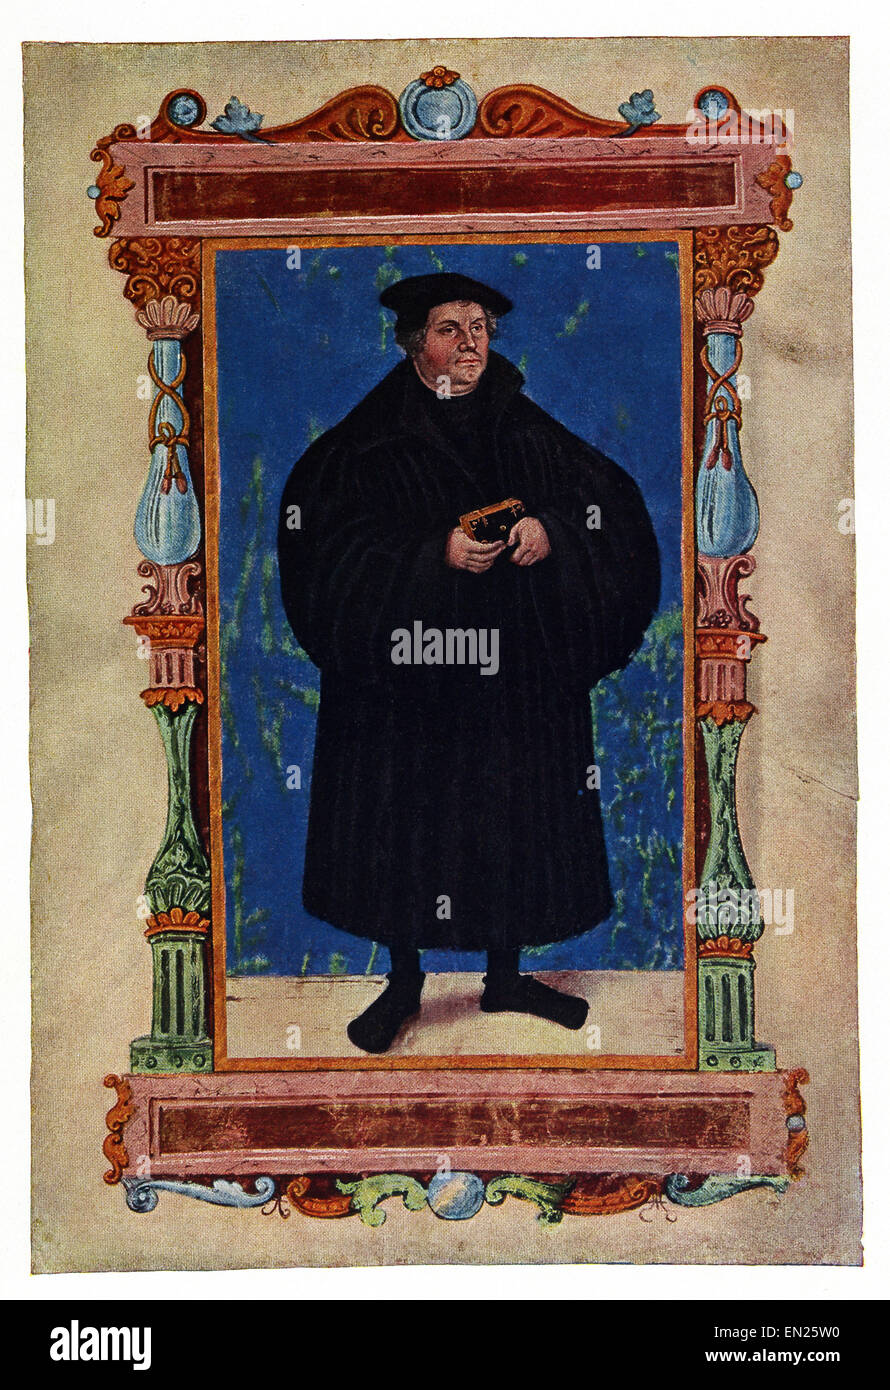 This oil portrait of Martin Luther (1483-1546), the German leader of the Protestant Reformation, was painted by the German artist Lucas Cranach the Elder (1472-1553). Stock Photo